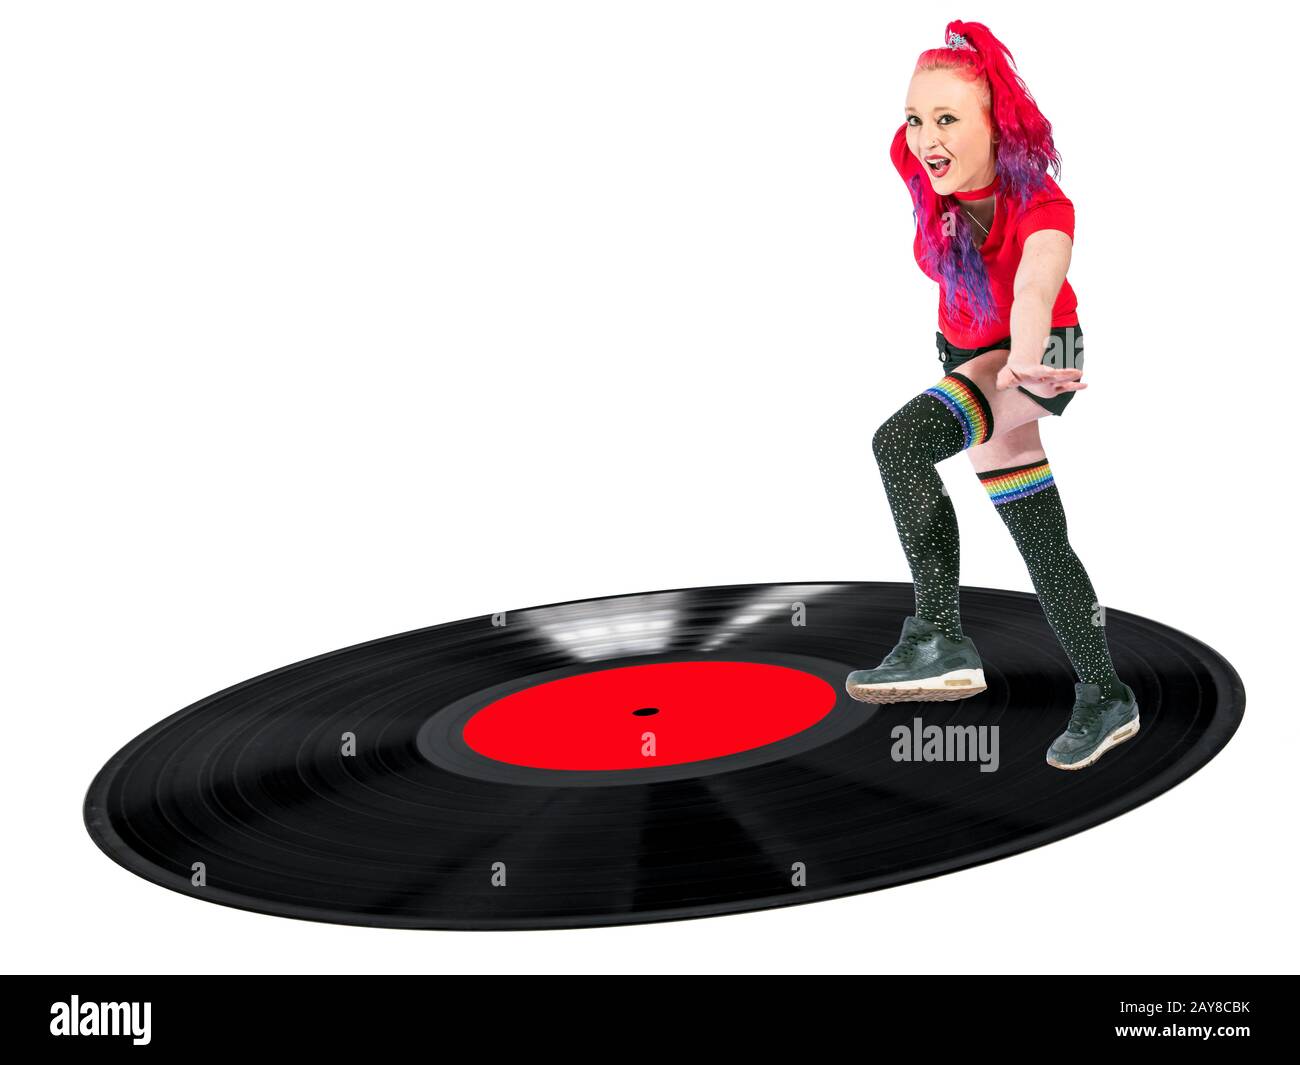 Woman with red hair and knee socks dancing on a vinyl record laughing Stock Photo